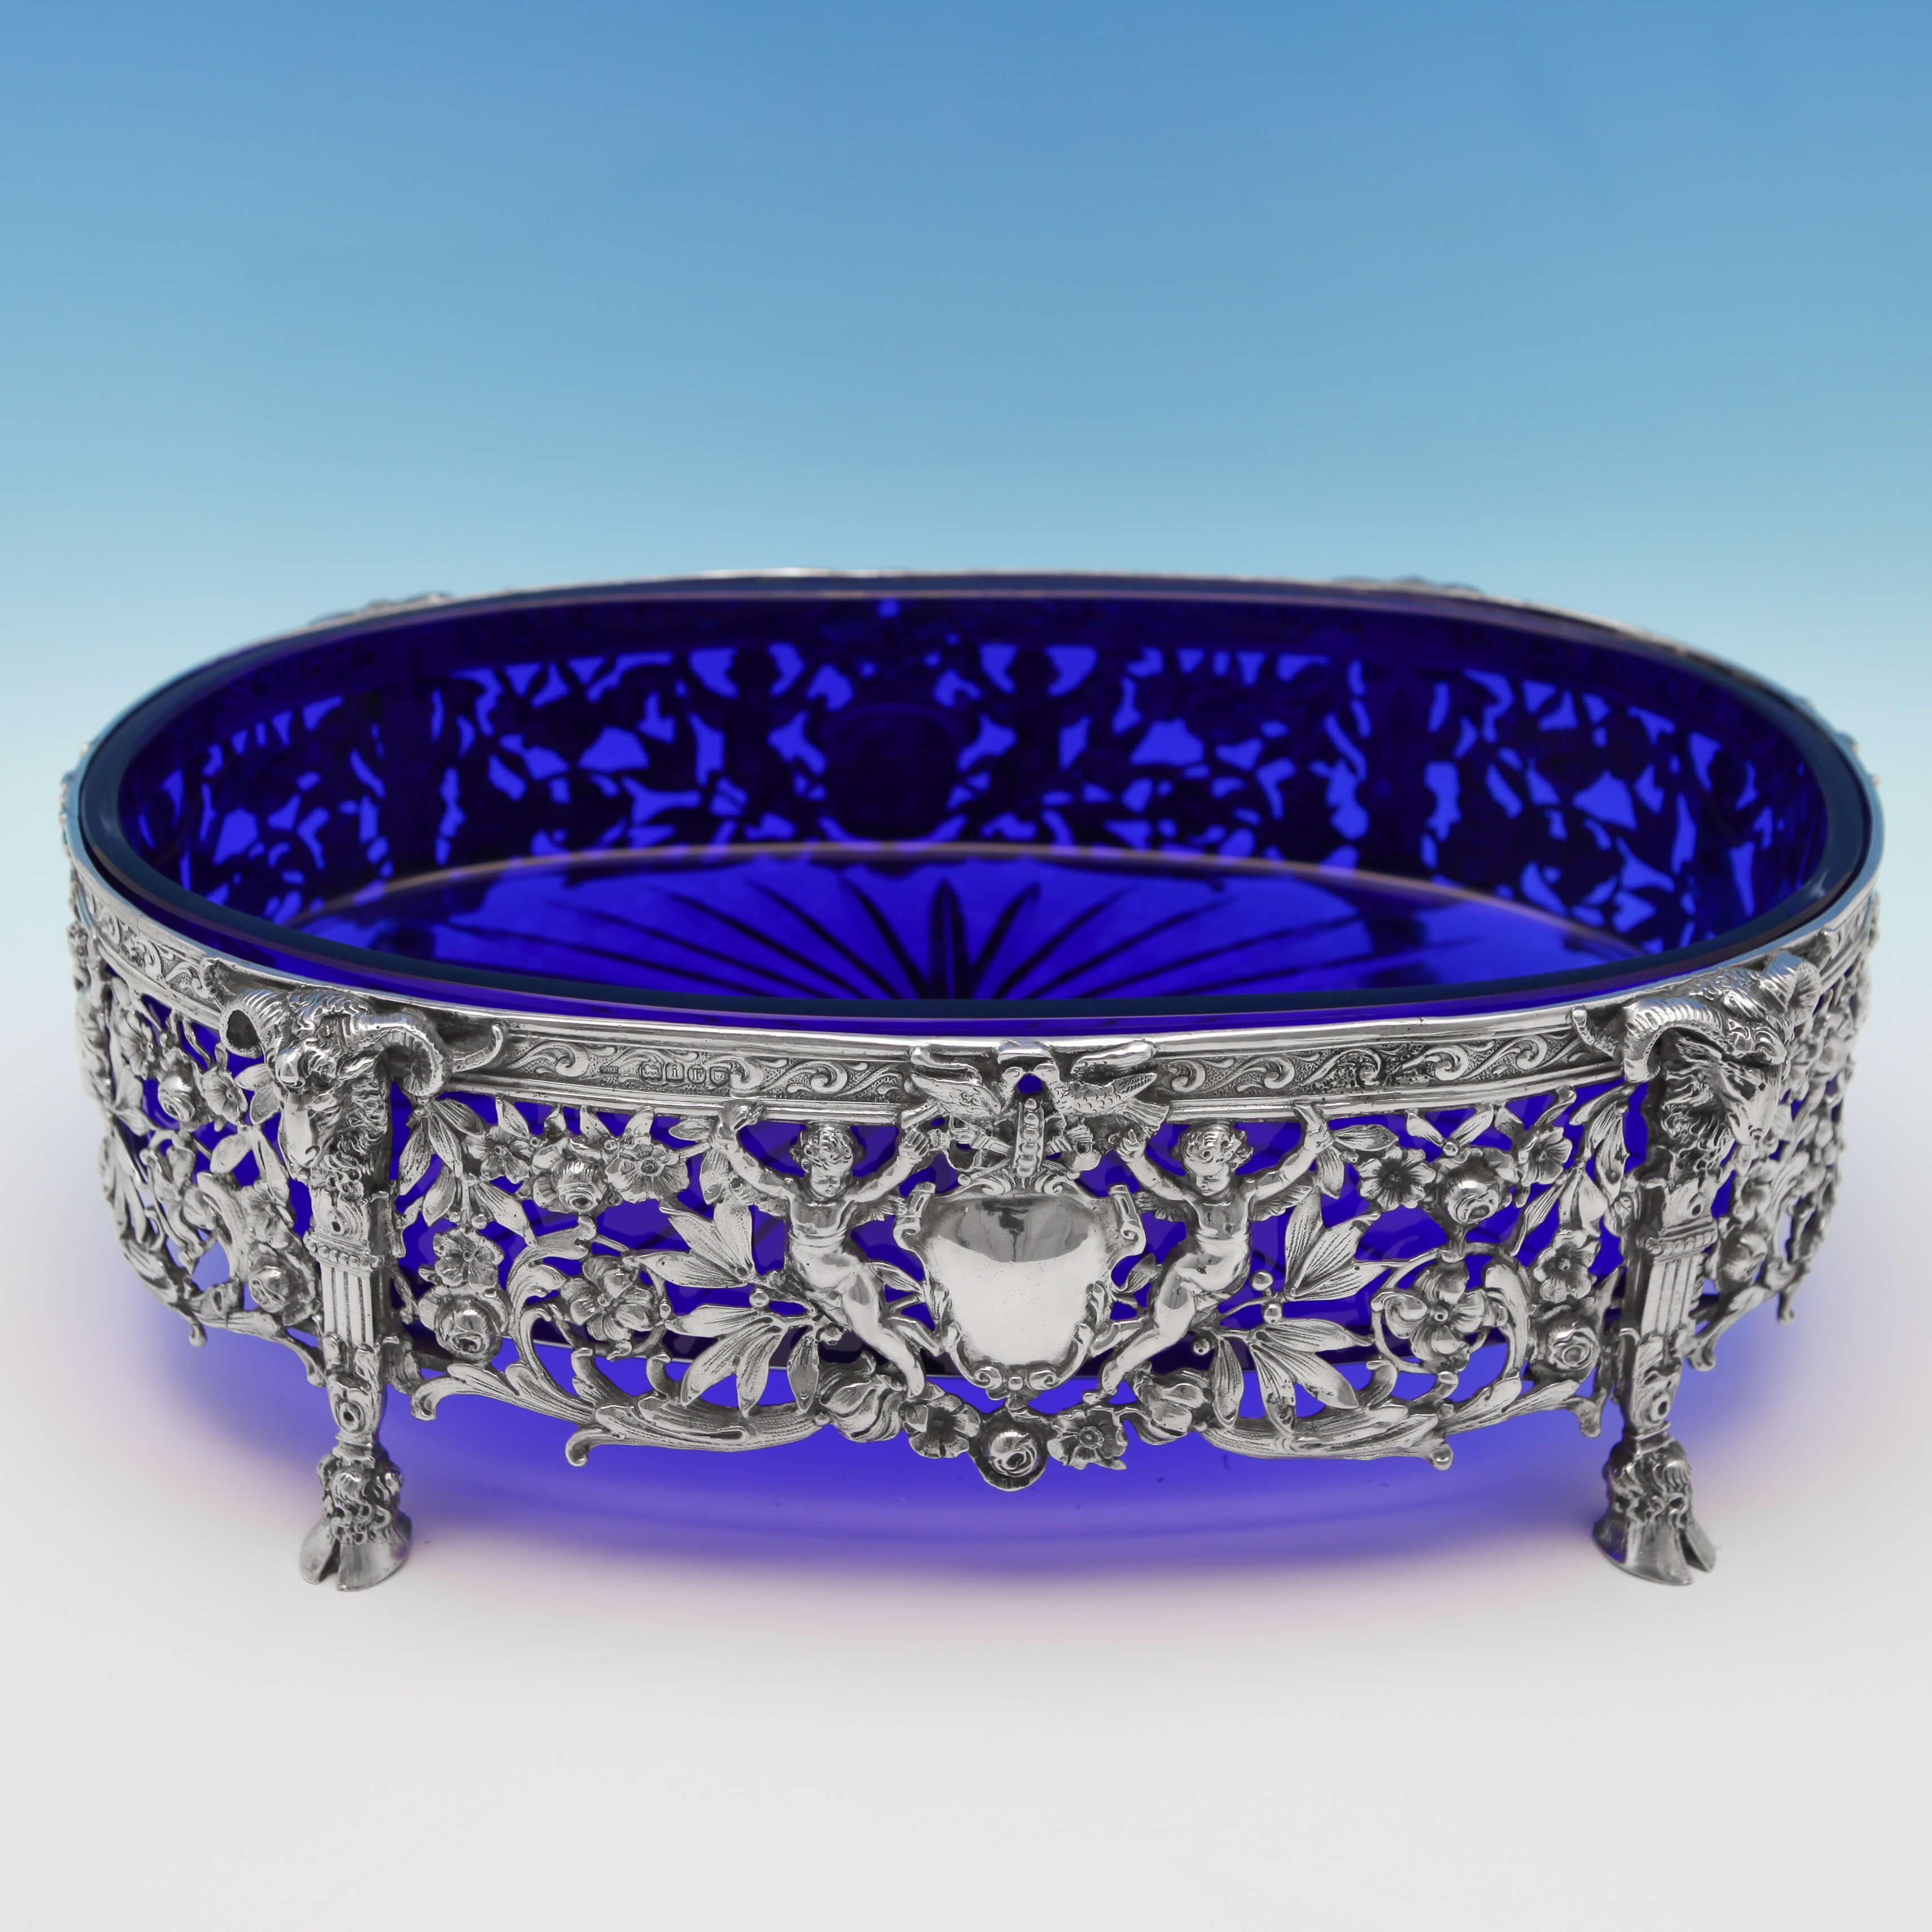 Carrying import marks for London, 1904 by Samuel Boyce Landeck, this stunning Edwardian, Antique, sterling silver jardinière, has beautifully detailed pierced decoration depicting cherubs, scrolls, flowers and leaves. Standing on hoof feet, with the